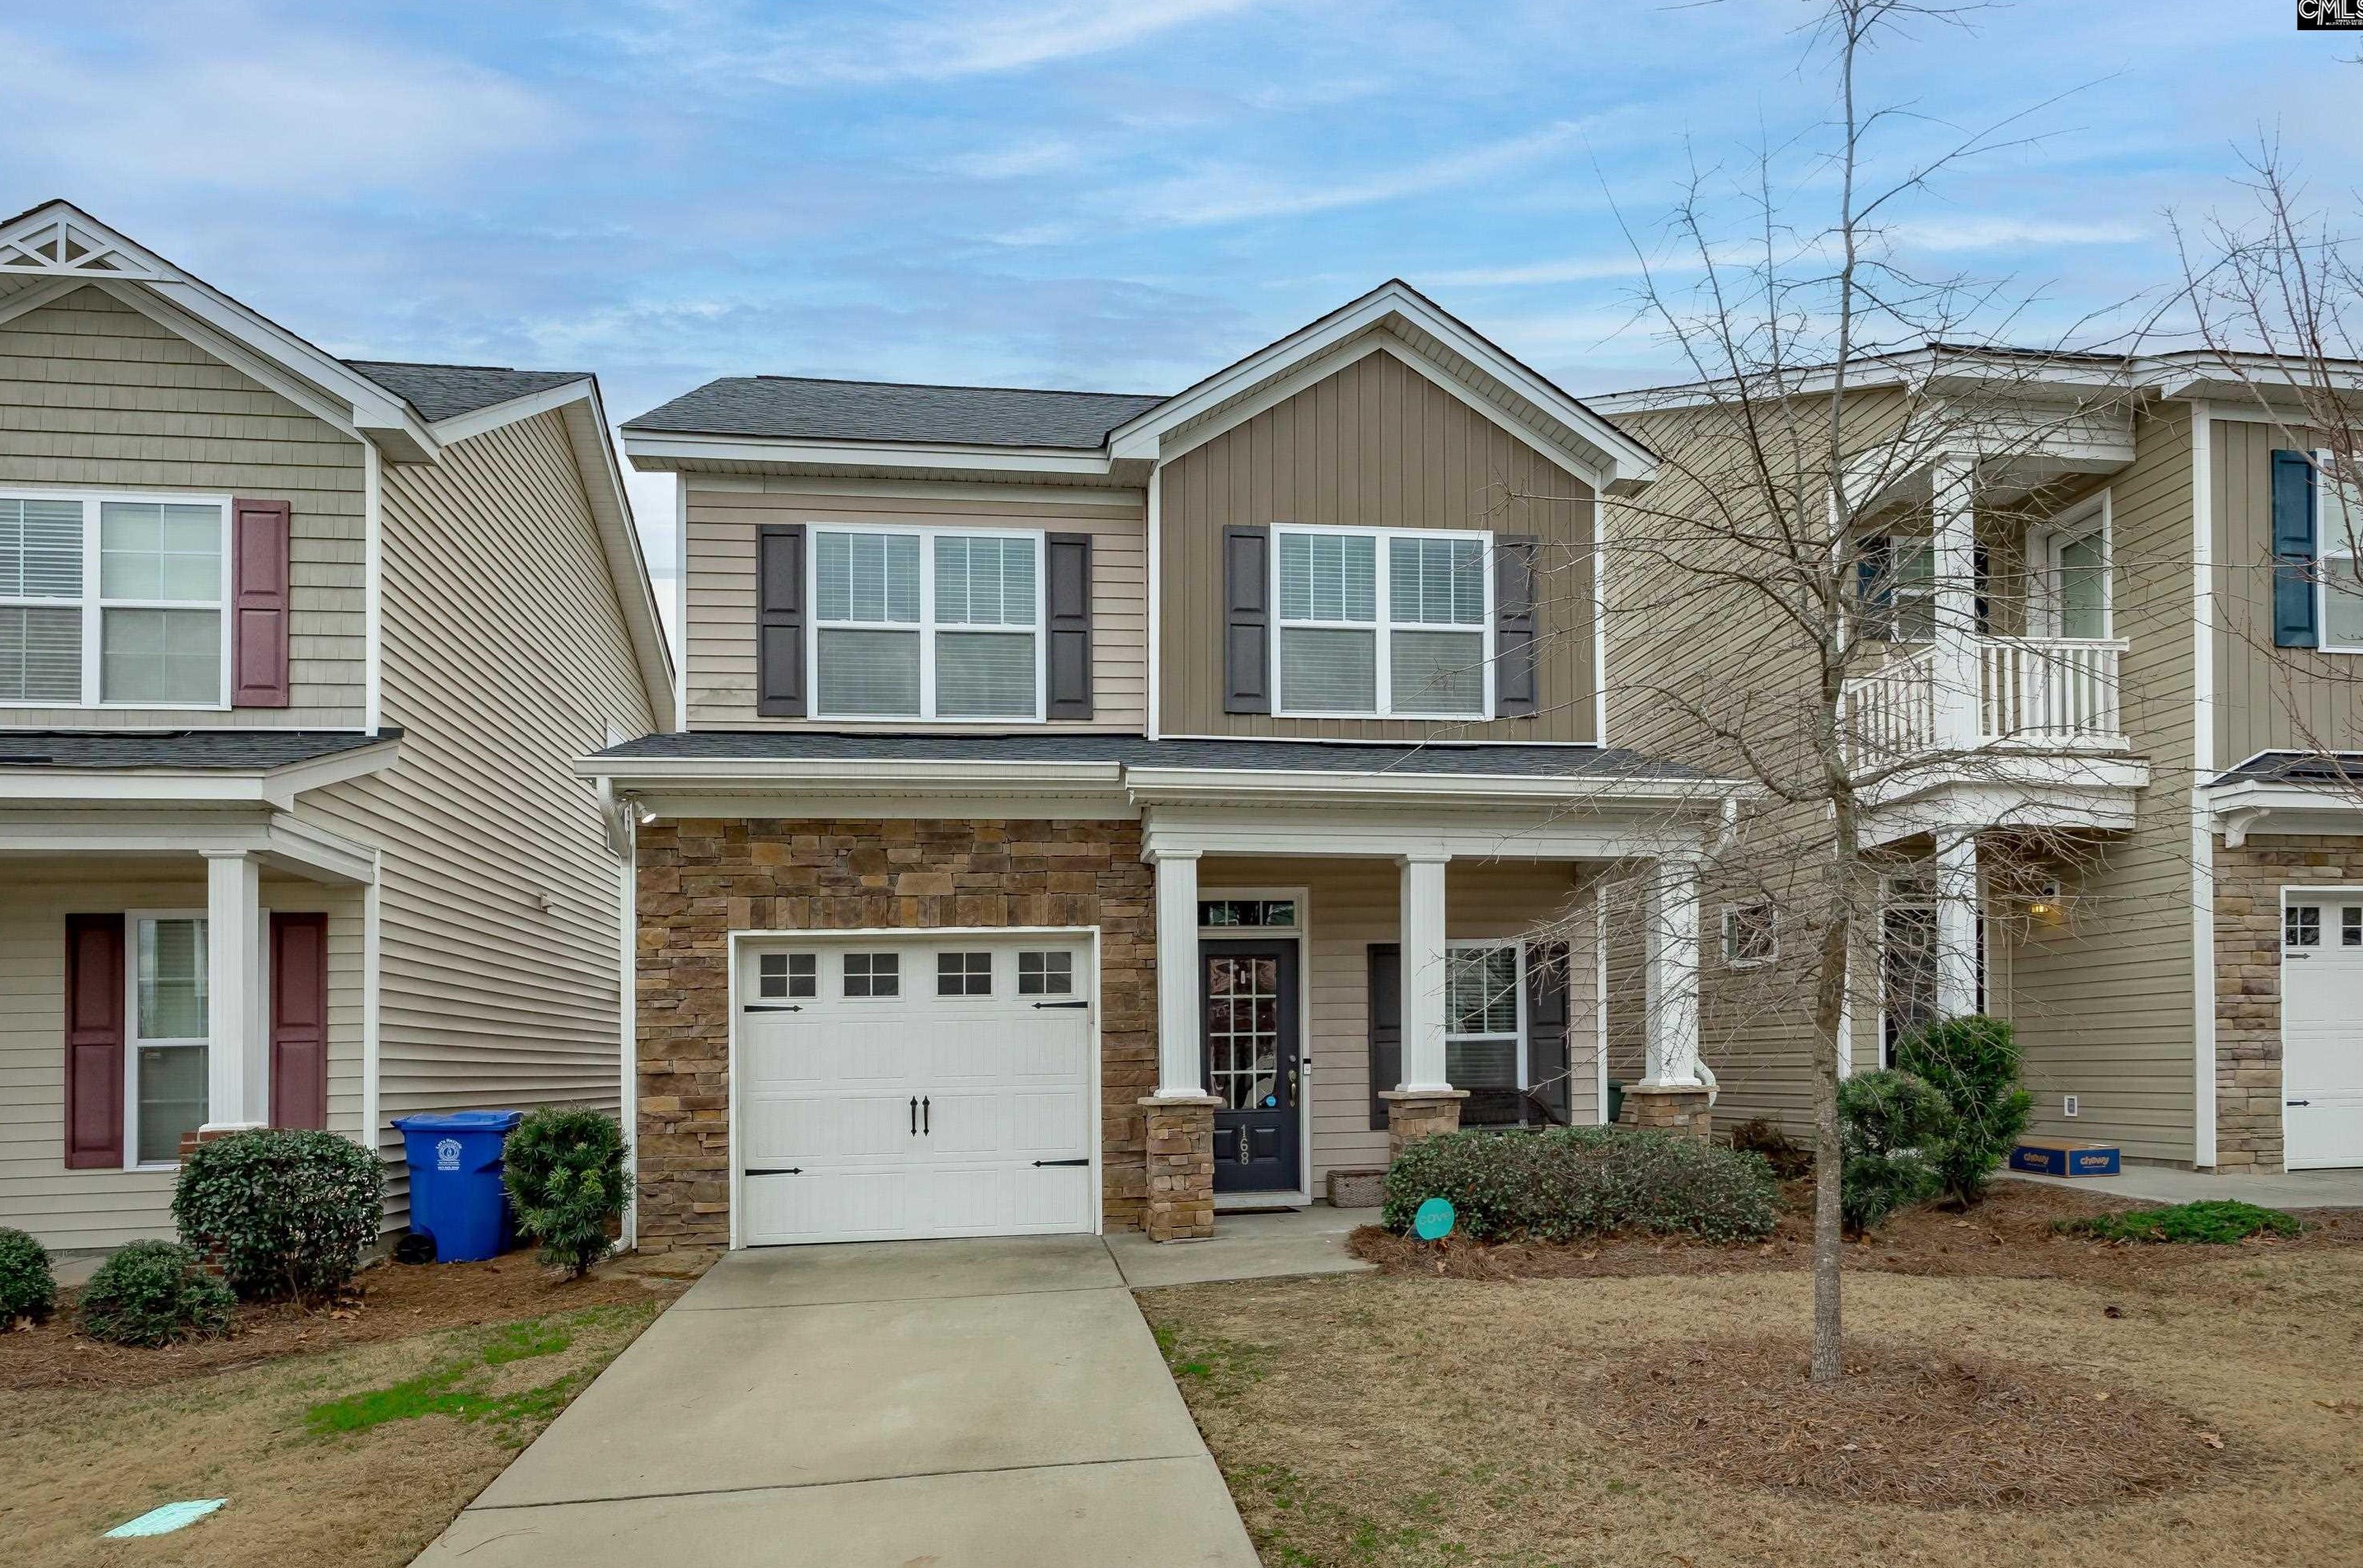 168 Top Forest Drive, Columbia, SC 29209